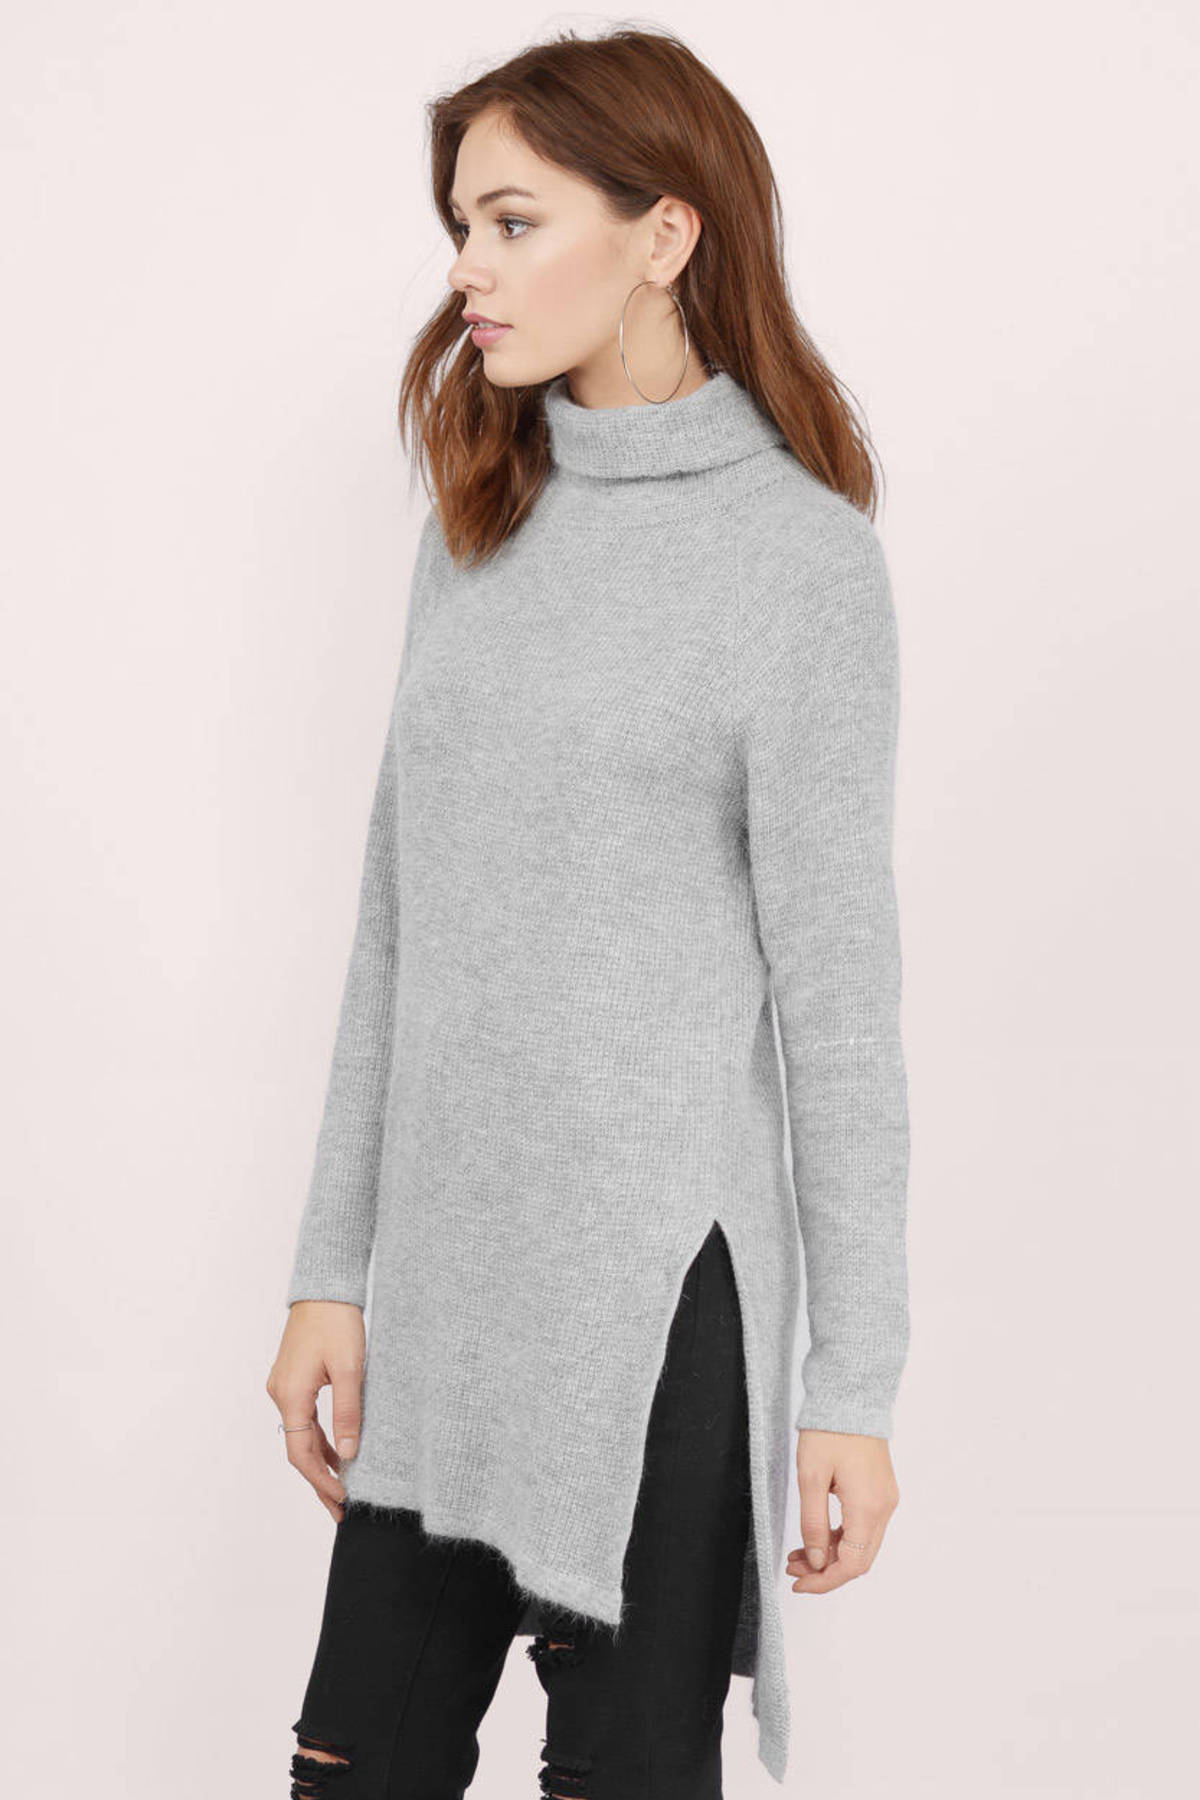 Roll With Me Turtleneck Sweater in Grey - $38 | Tobi US